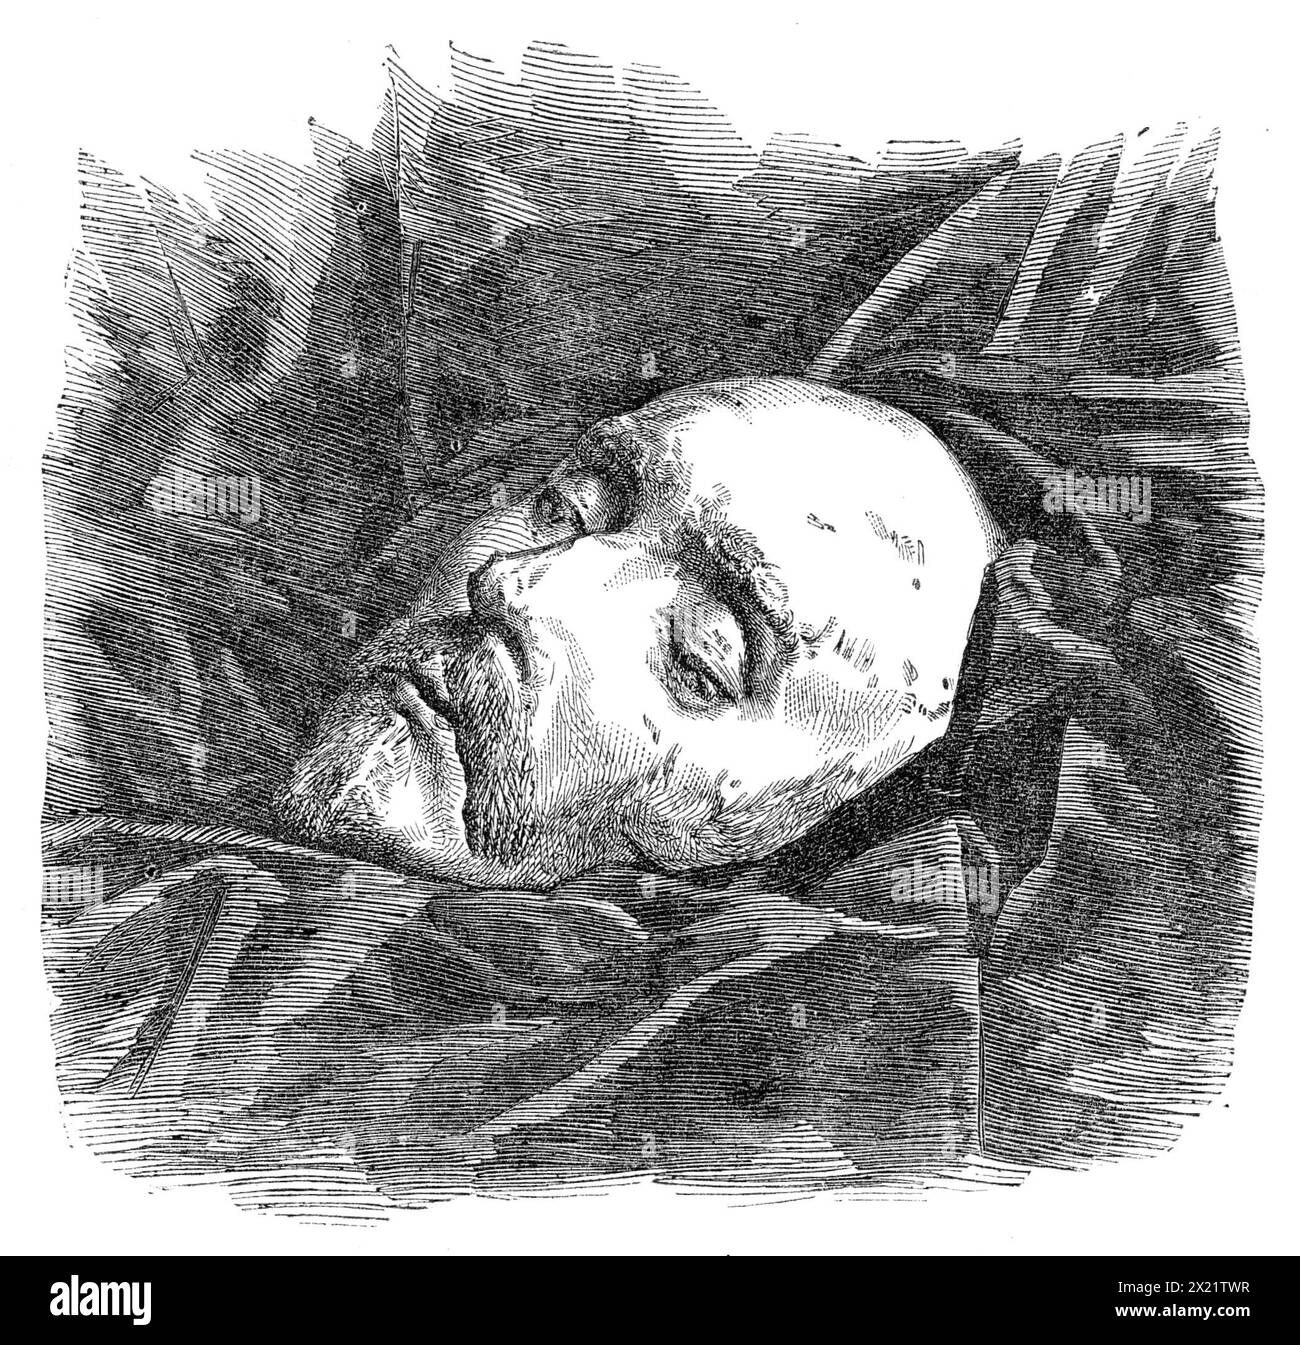 Cast of Shakspeare's face, 1864. Death mask of English playwright, poet and actor William Shakespeare (1564-1616). The cast from the face of Shakspeare, supposed to have been taken after his death, has been photographed and published by the London Stereoscopic Company'. From &quot;Illustrated London News&quot;, 1864. Stock Photo